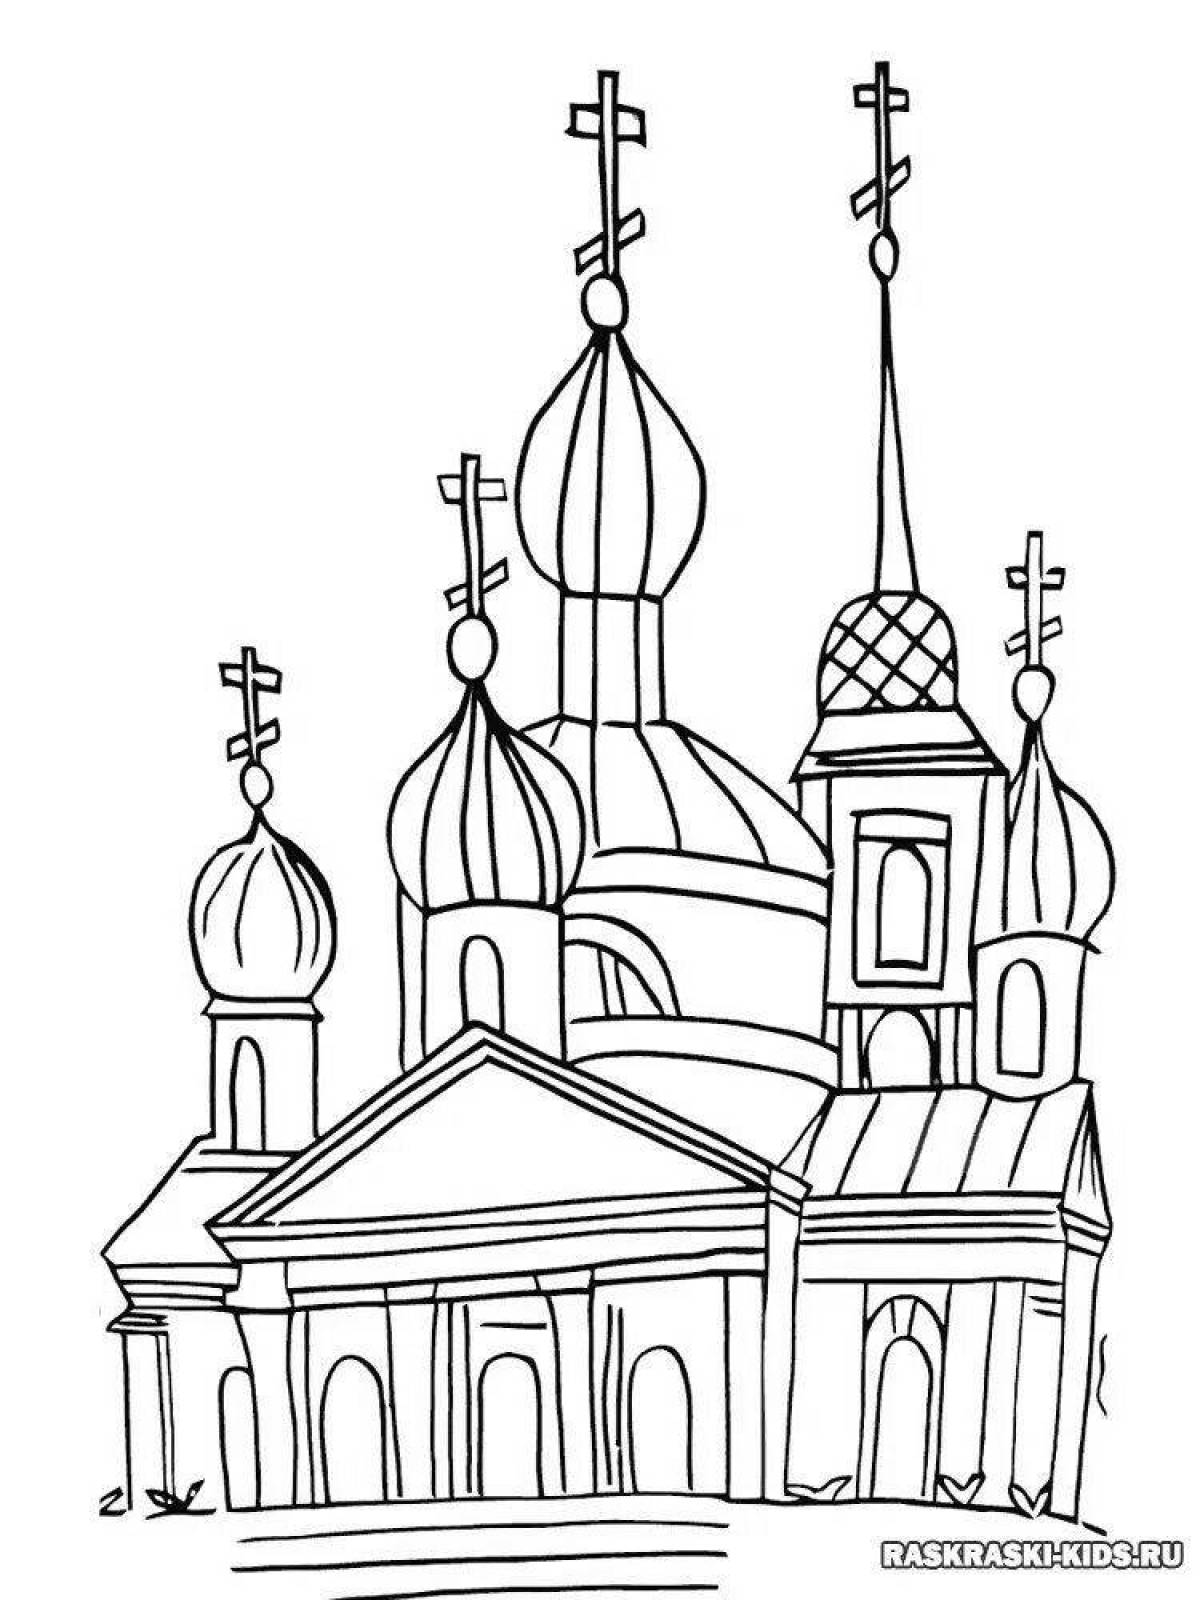 Exquisite drawing of a church